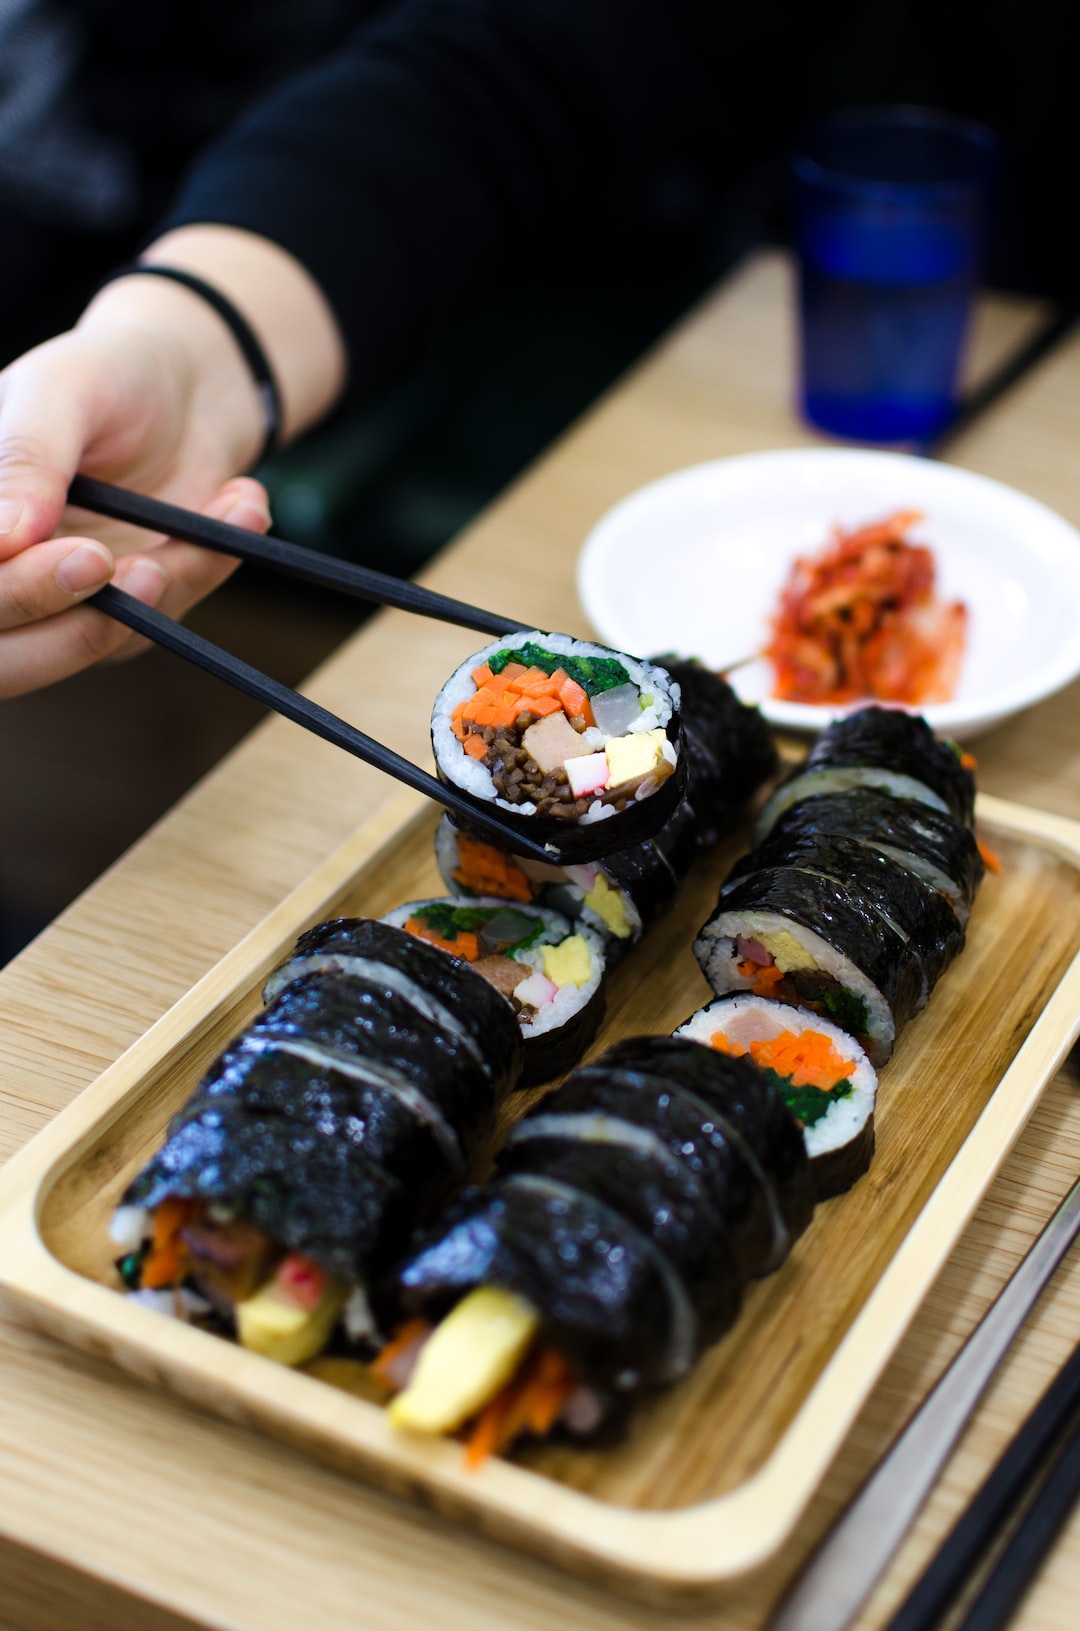 The History and Legends Behind Korean Dish Kimbap – Rice Rolls